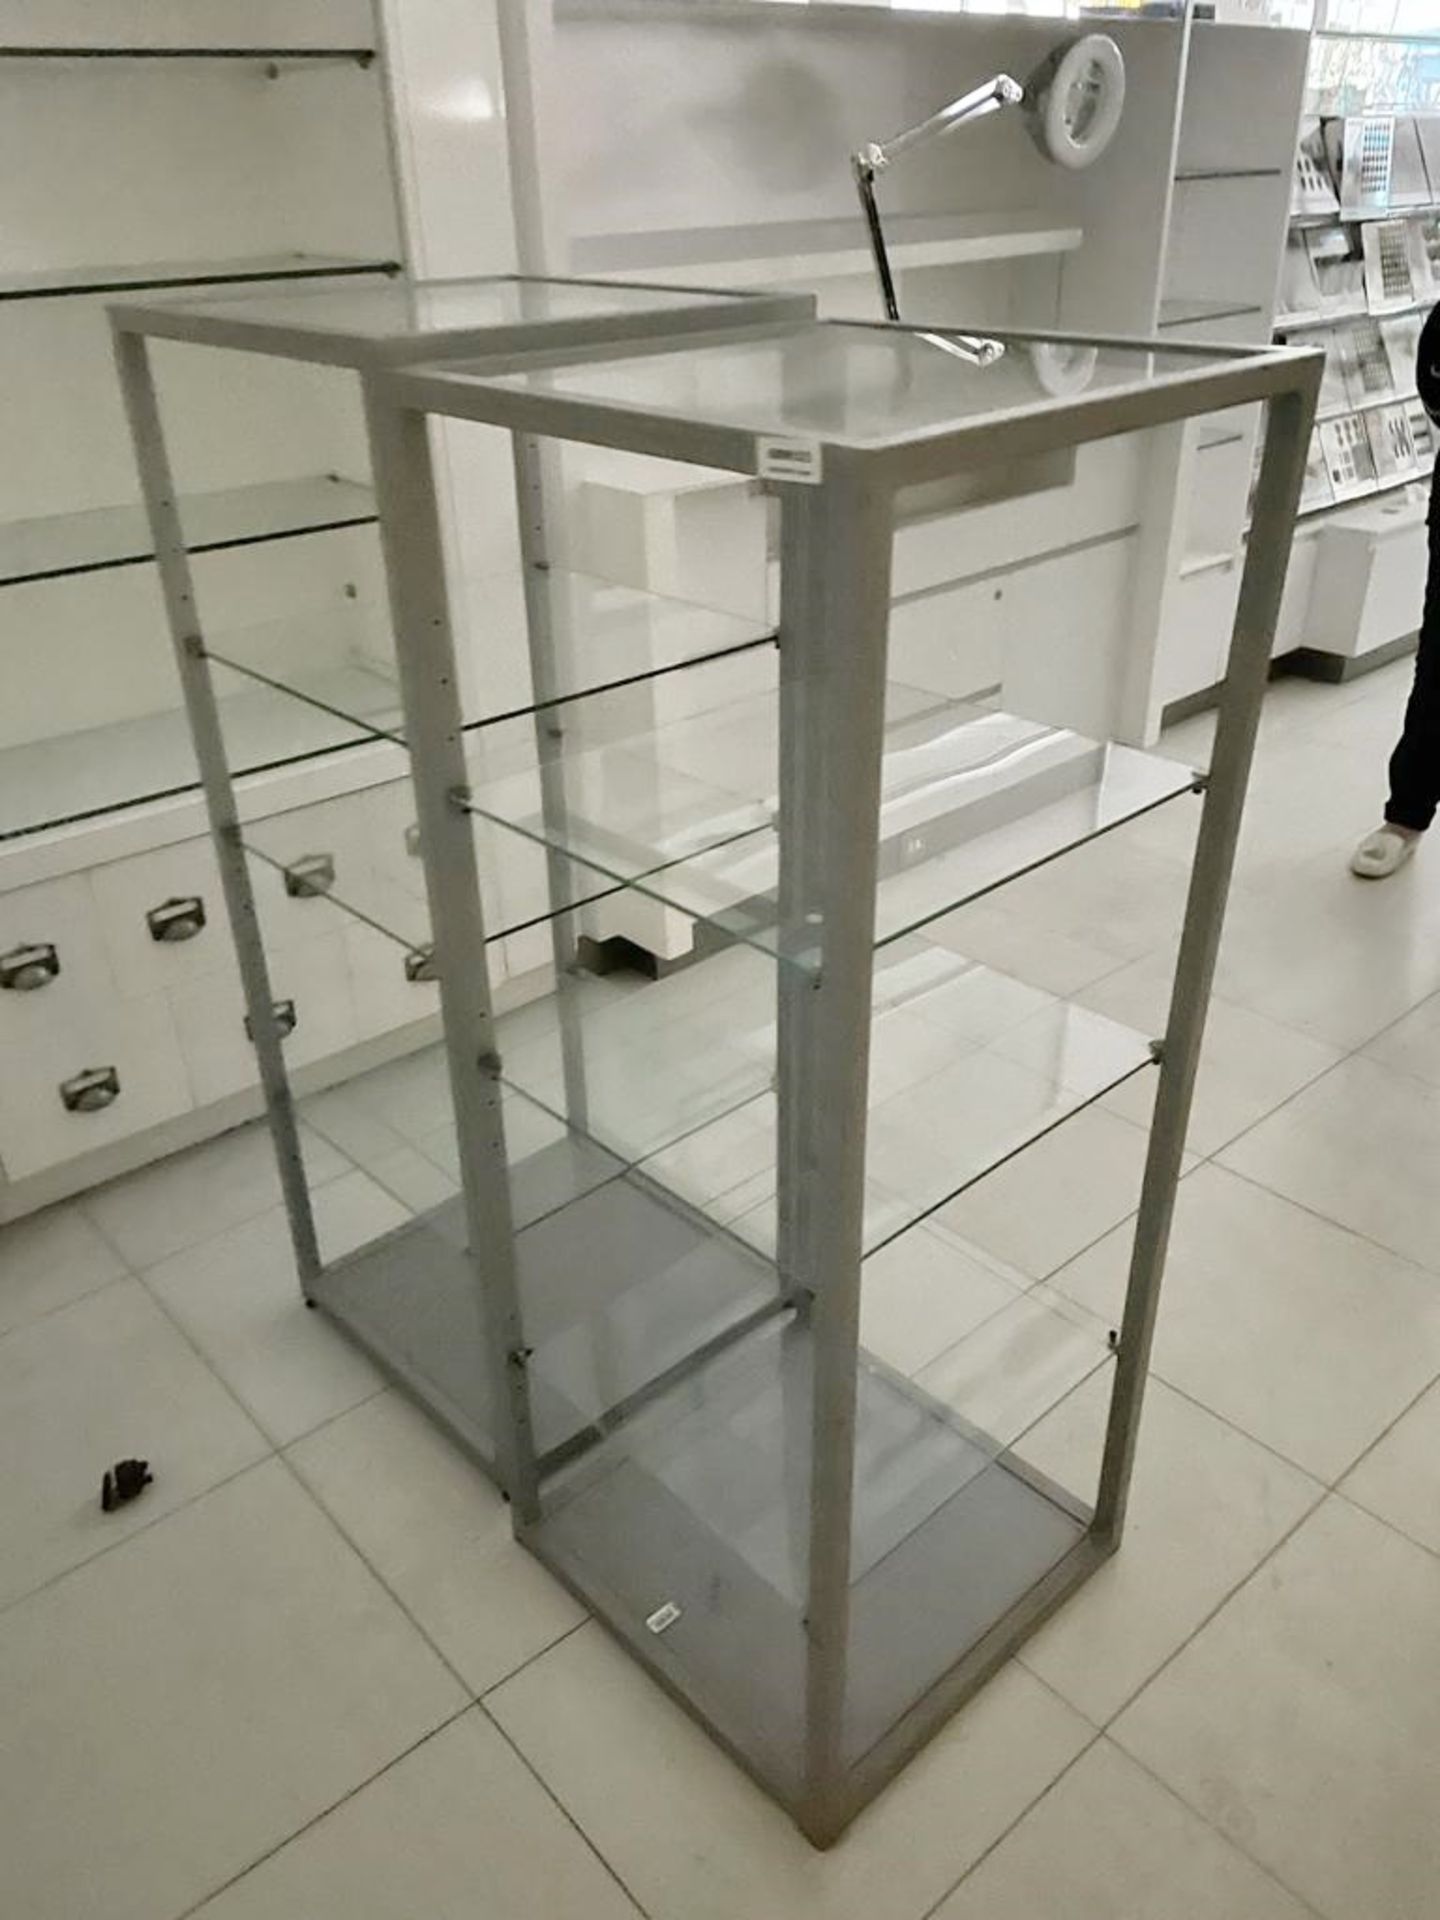 6 x Five Tier Display Shelves With Metal Frame and Four Glass Shelves - Size H129 x W50 x D50 - Image 3 of 3